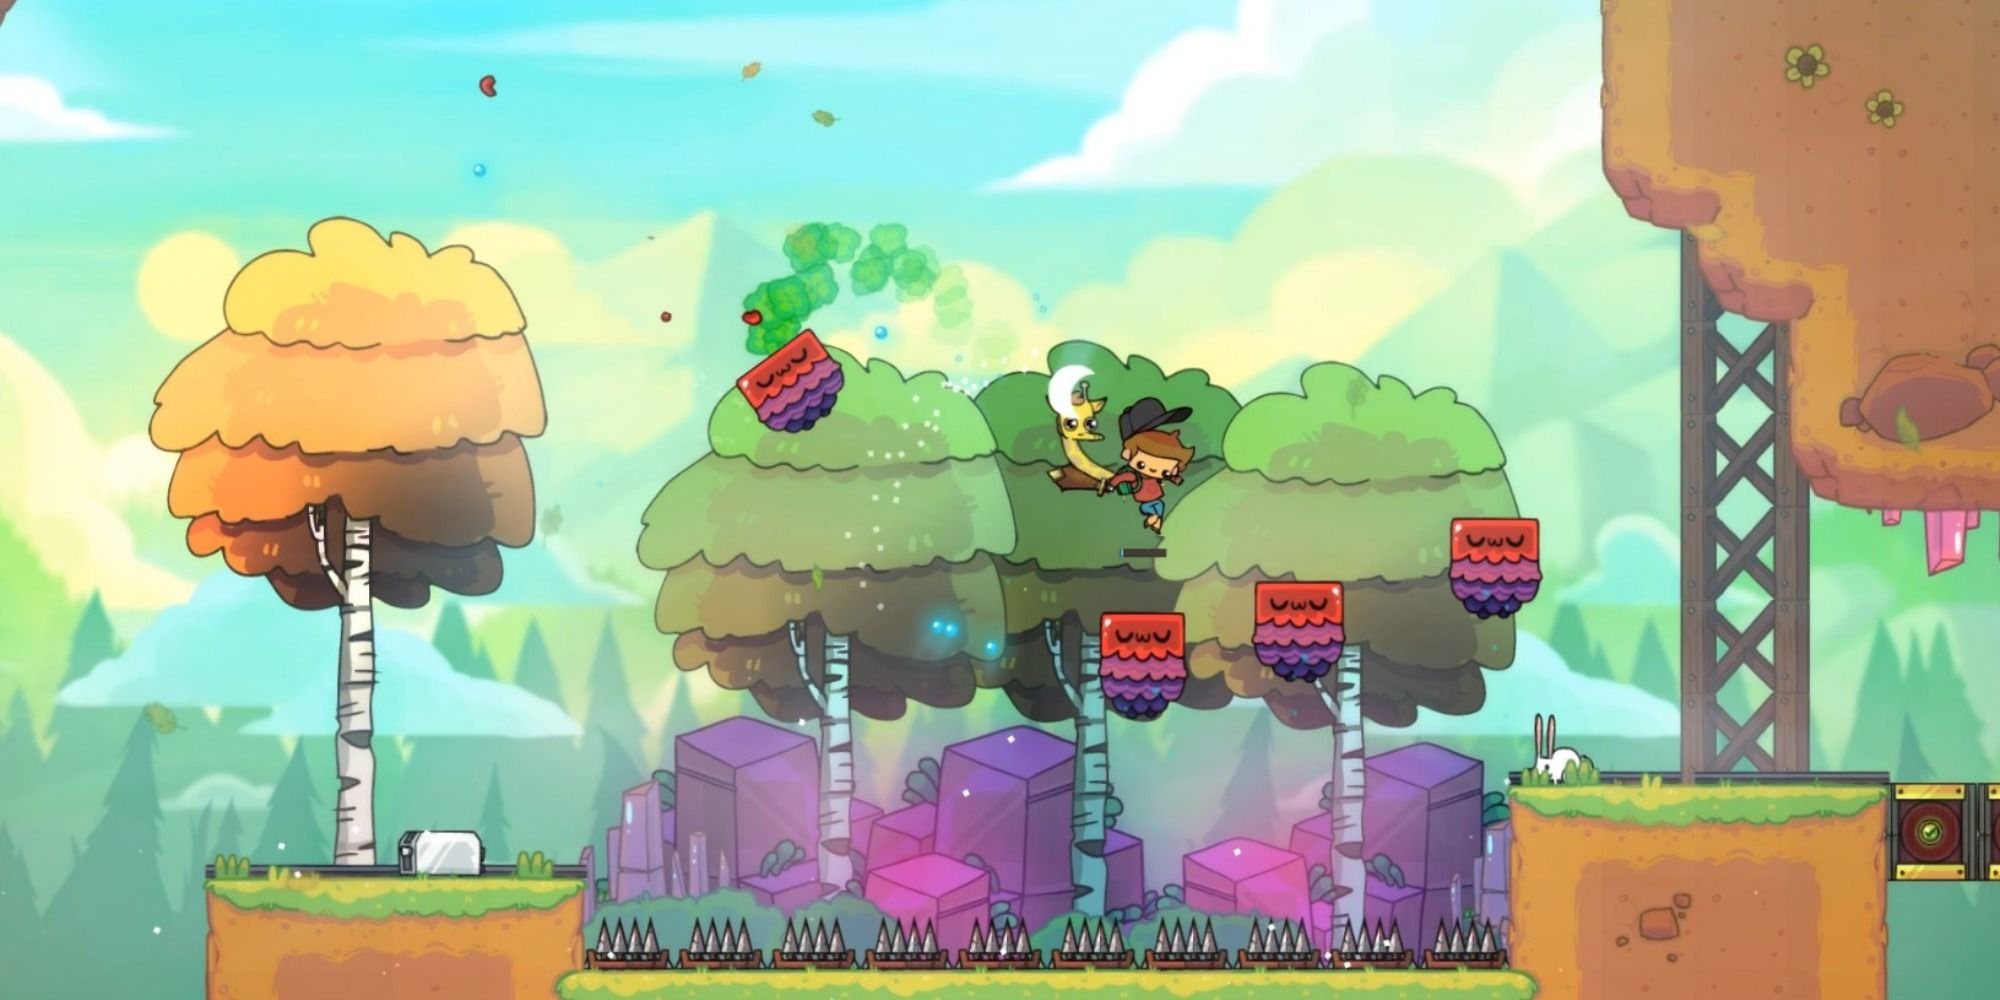 hero, mr rock, and sparkles jumping on baddies in the adventure pals